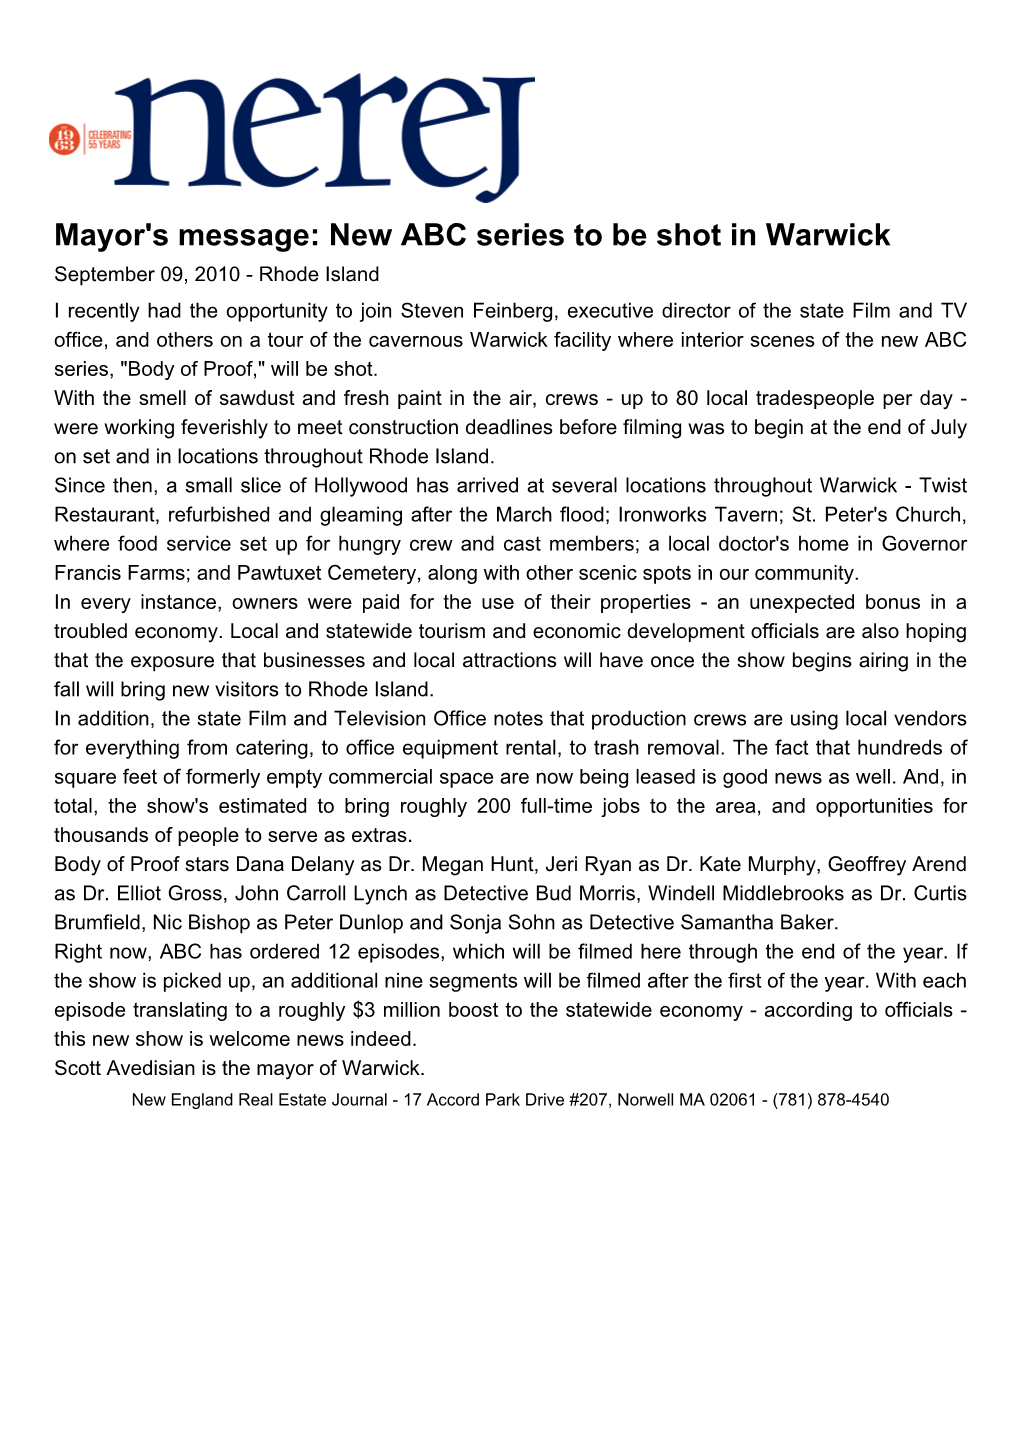 Mayor's Message: New ABC Series to Be Shot in Warwick